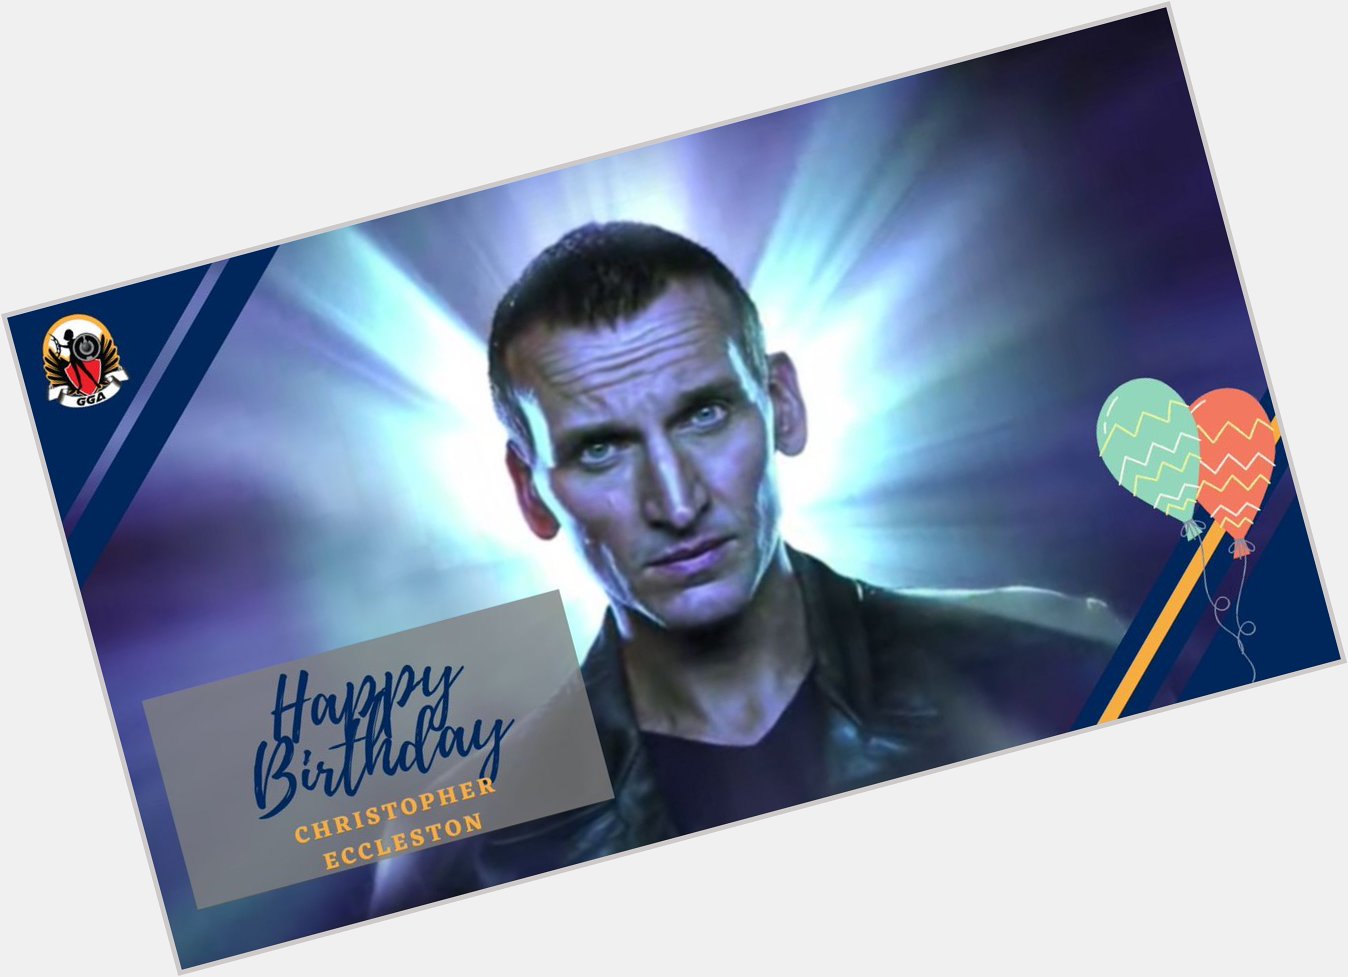 Happy Birthday, Christopher Eccleston! Which one of his roles is your favorite?  